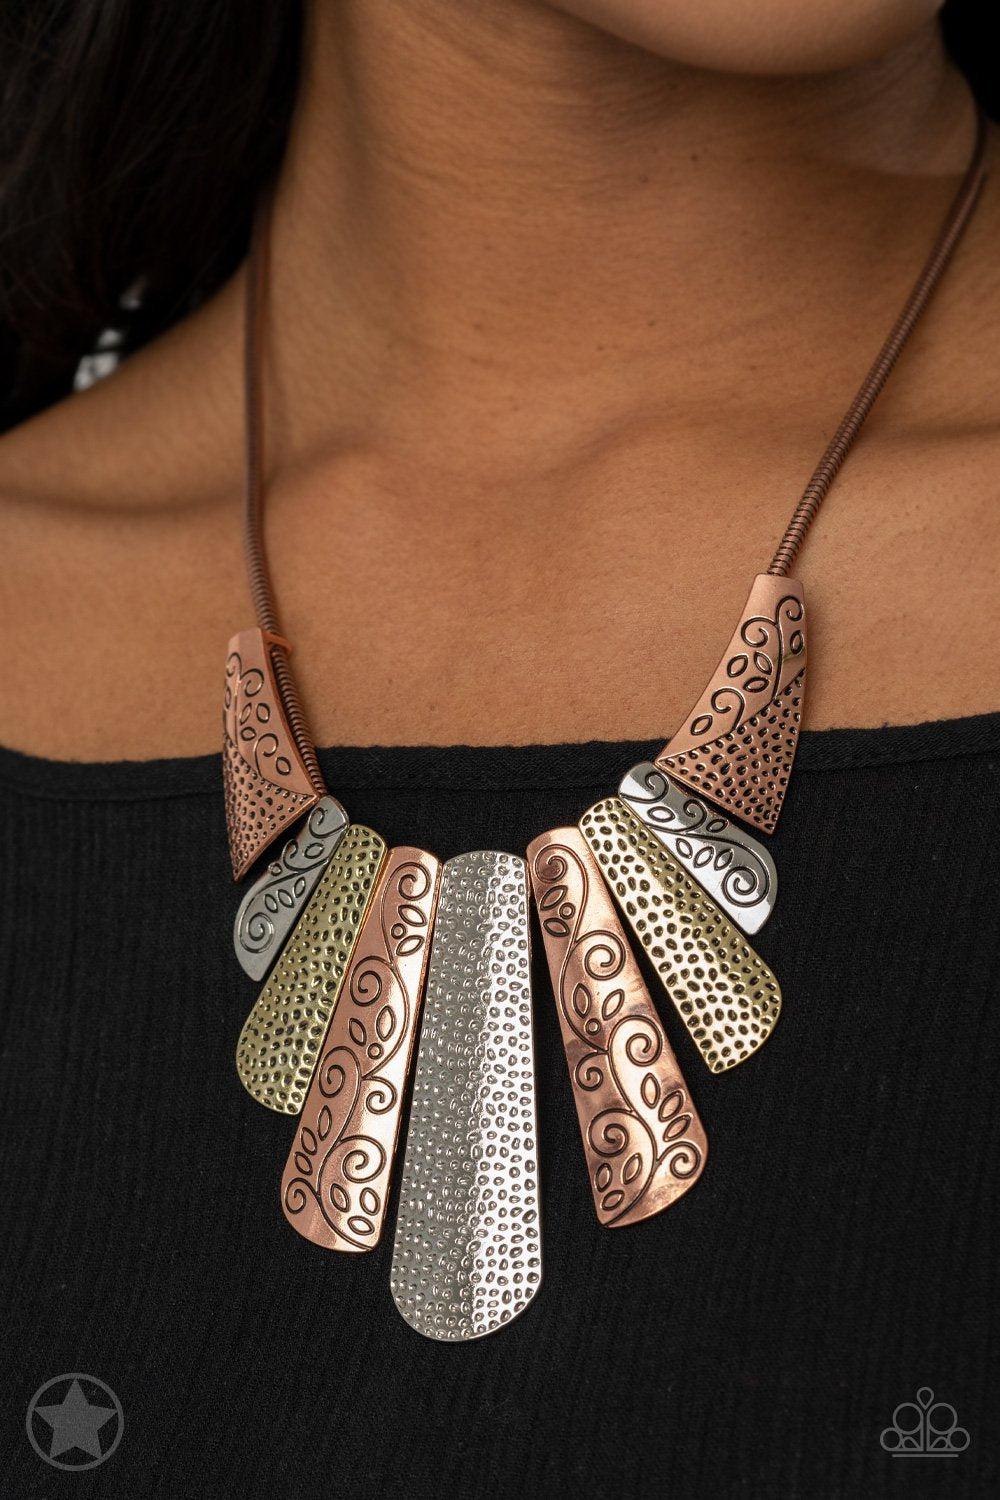 Untamed Silver Copper and Brass Statement Necklace and matching Earrings - Paparazzi Accessories - model -CarasShop.com - $5 Jewelry by Cara Jewels